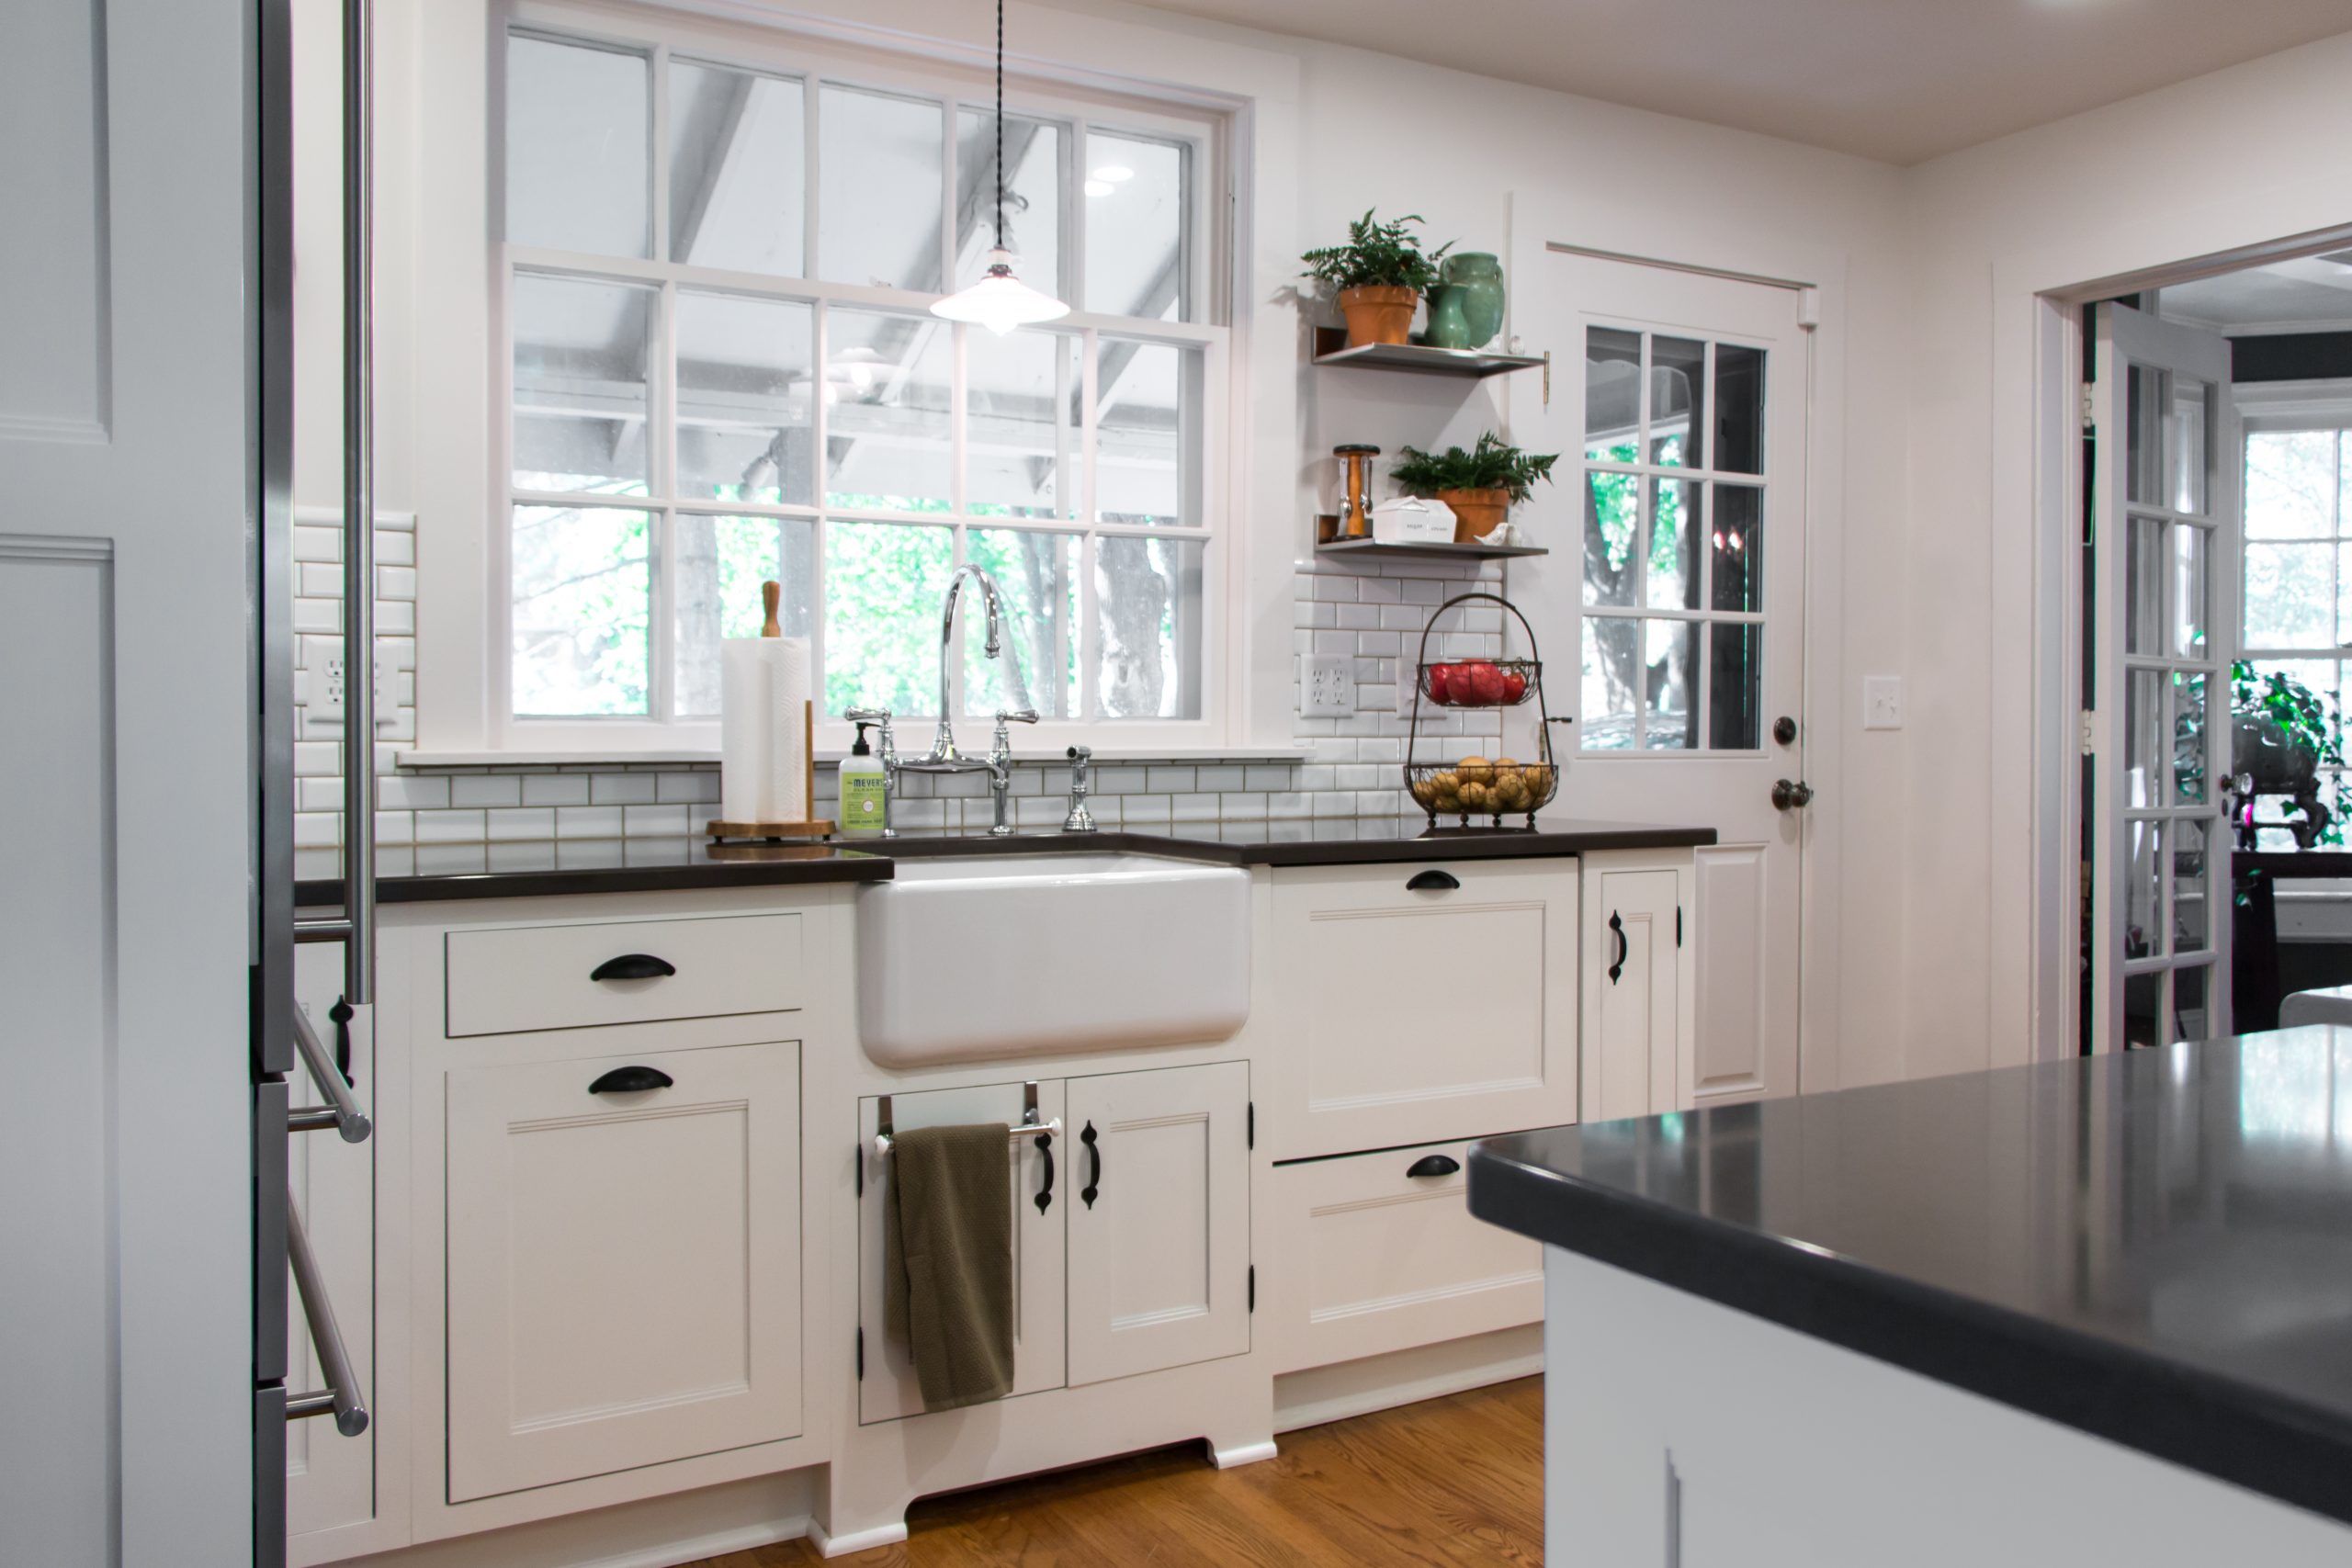 Elegant farmhouse kitchen and bath remodel with white cabinets and hardwood floors